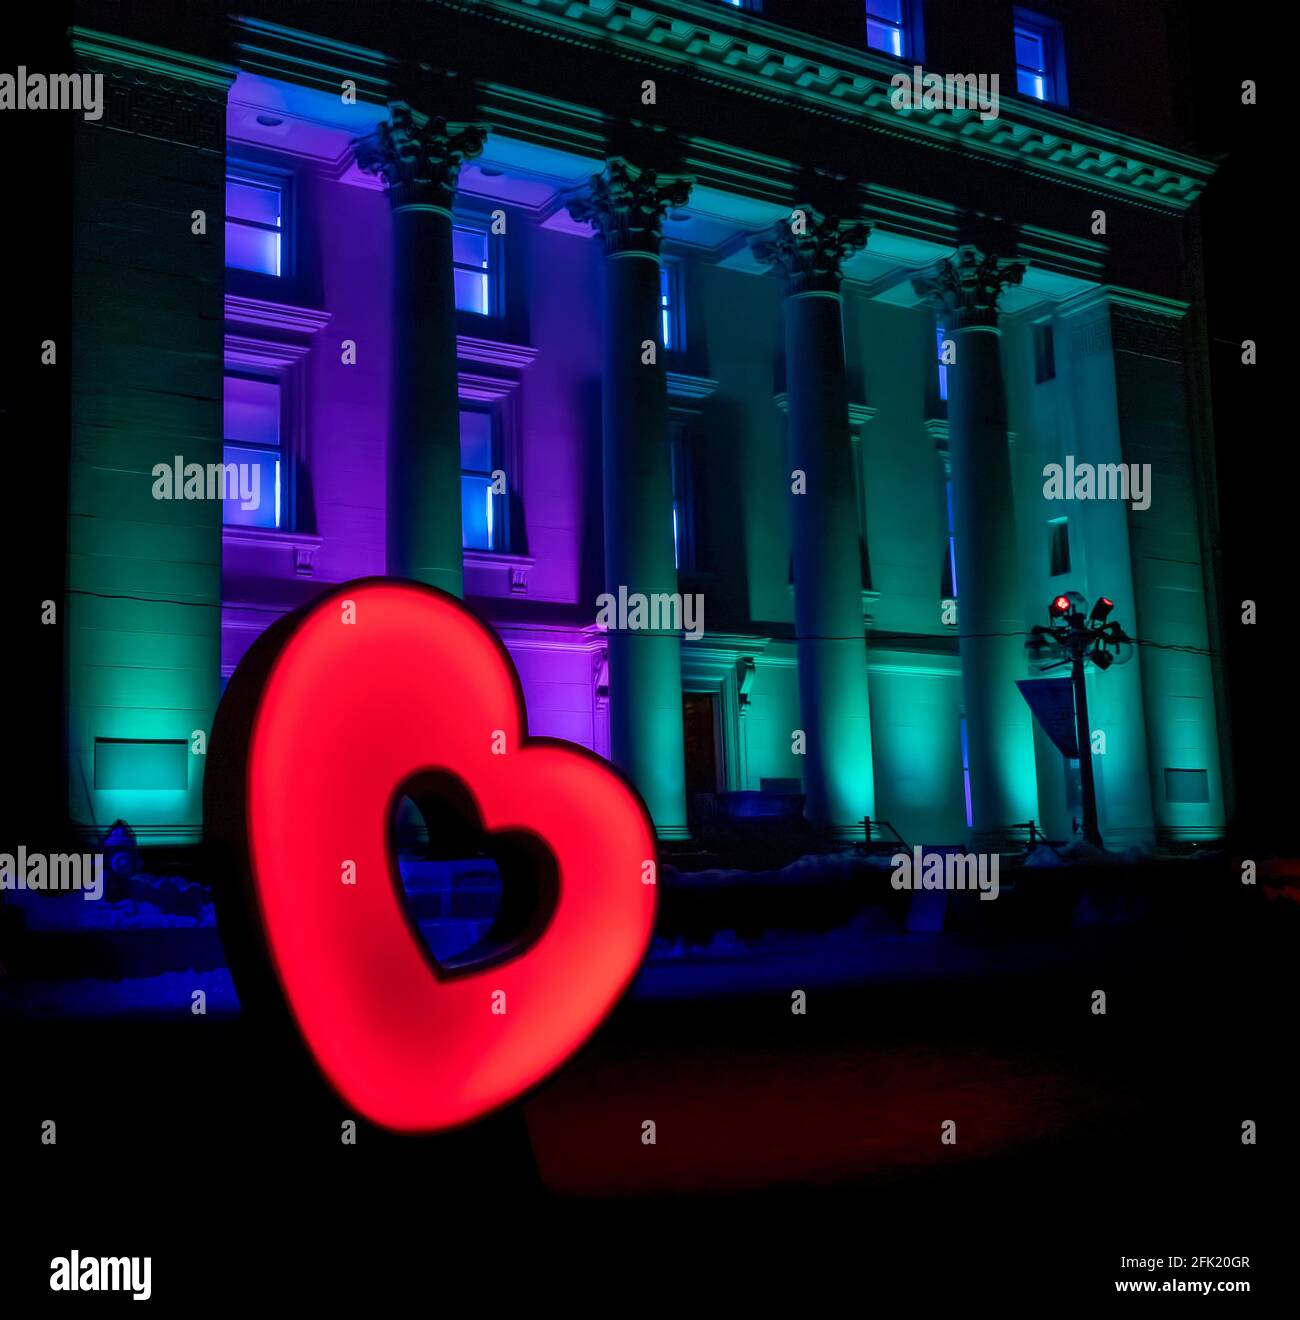 Classical style heritage bank building illuminated with aqua and purple colours at night, with a colour-changing heart in front Stock Photo